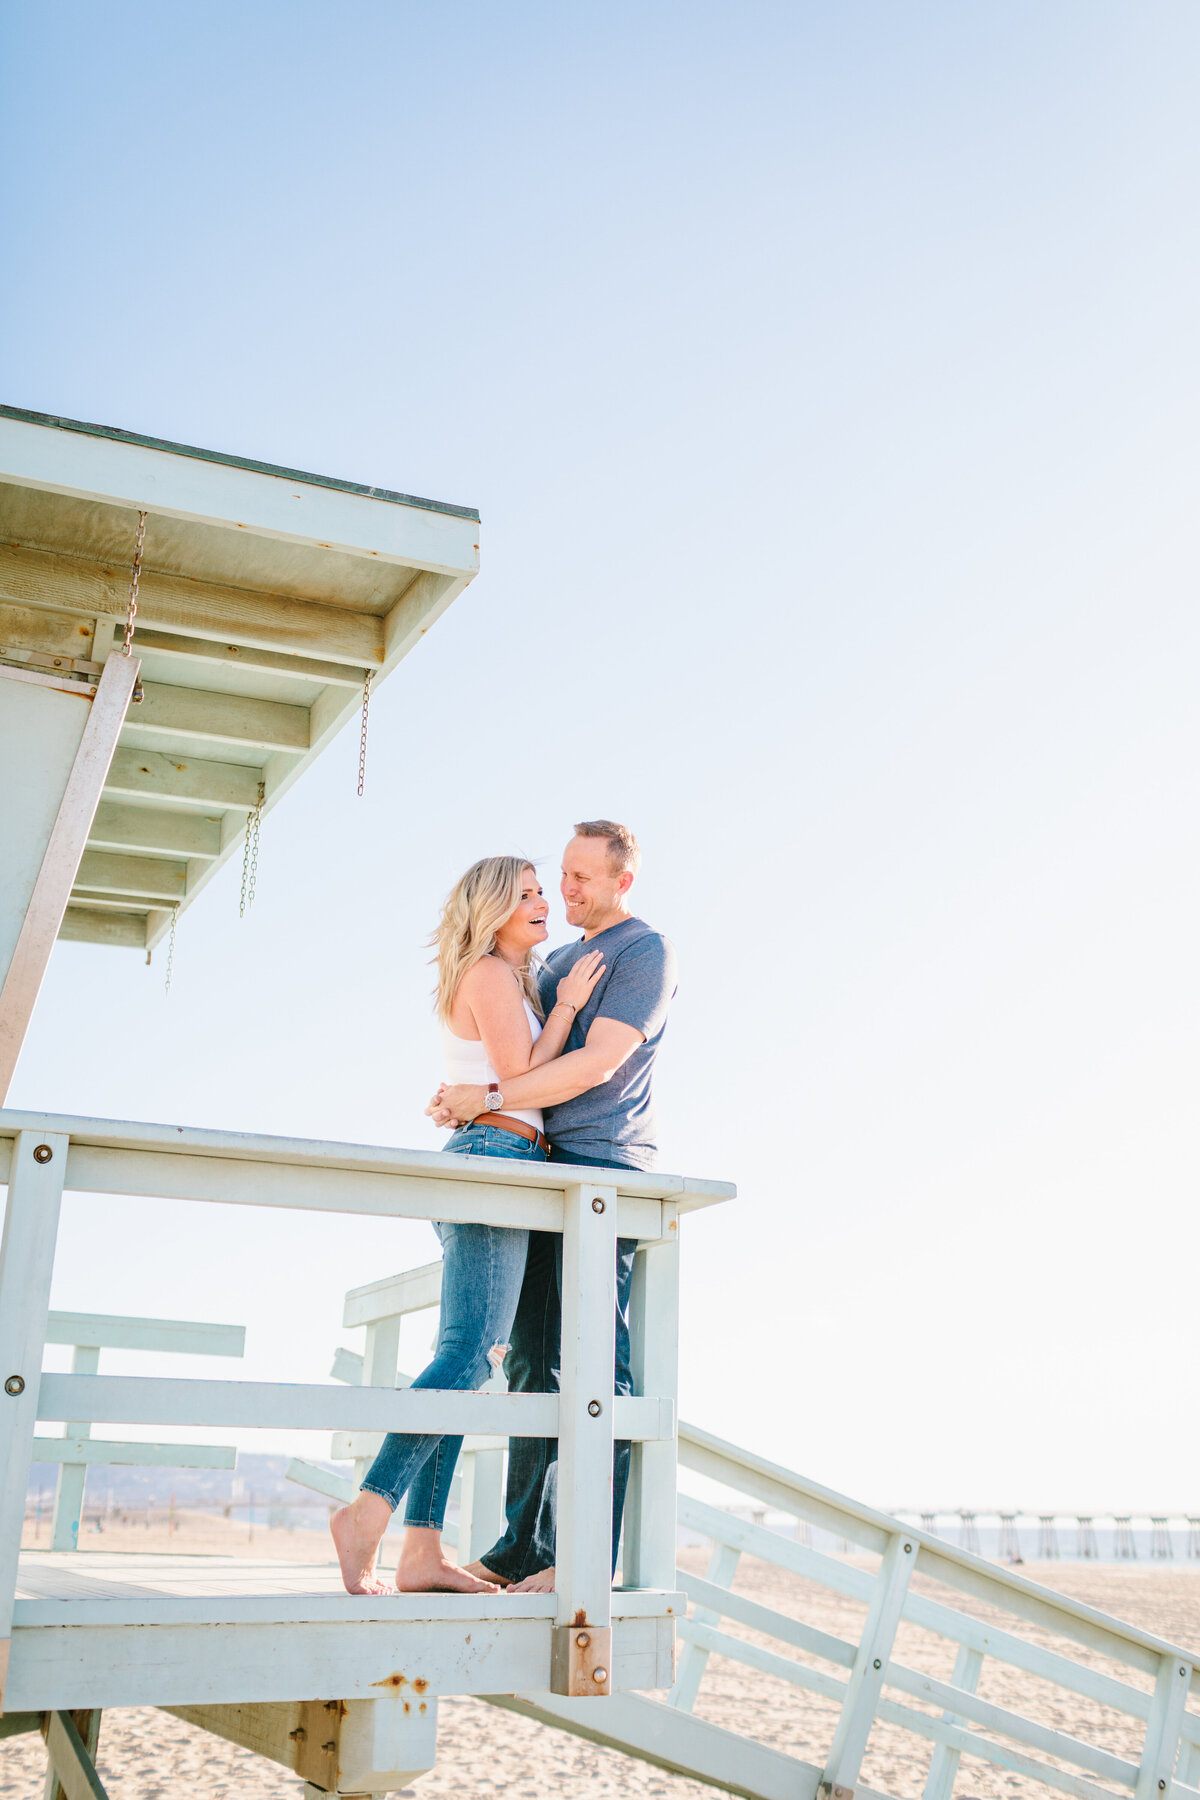 Best California and Texas Engagement Photographer-Jodee Debes Photography-41